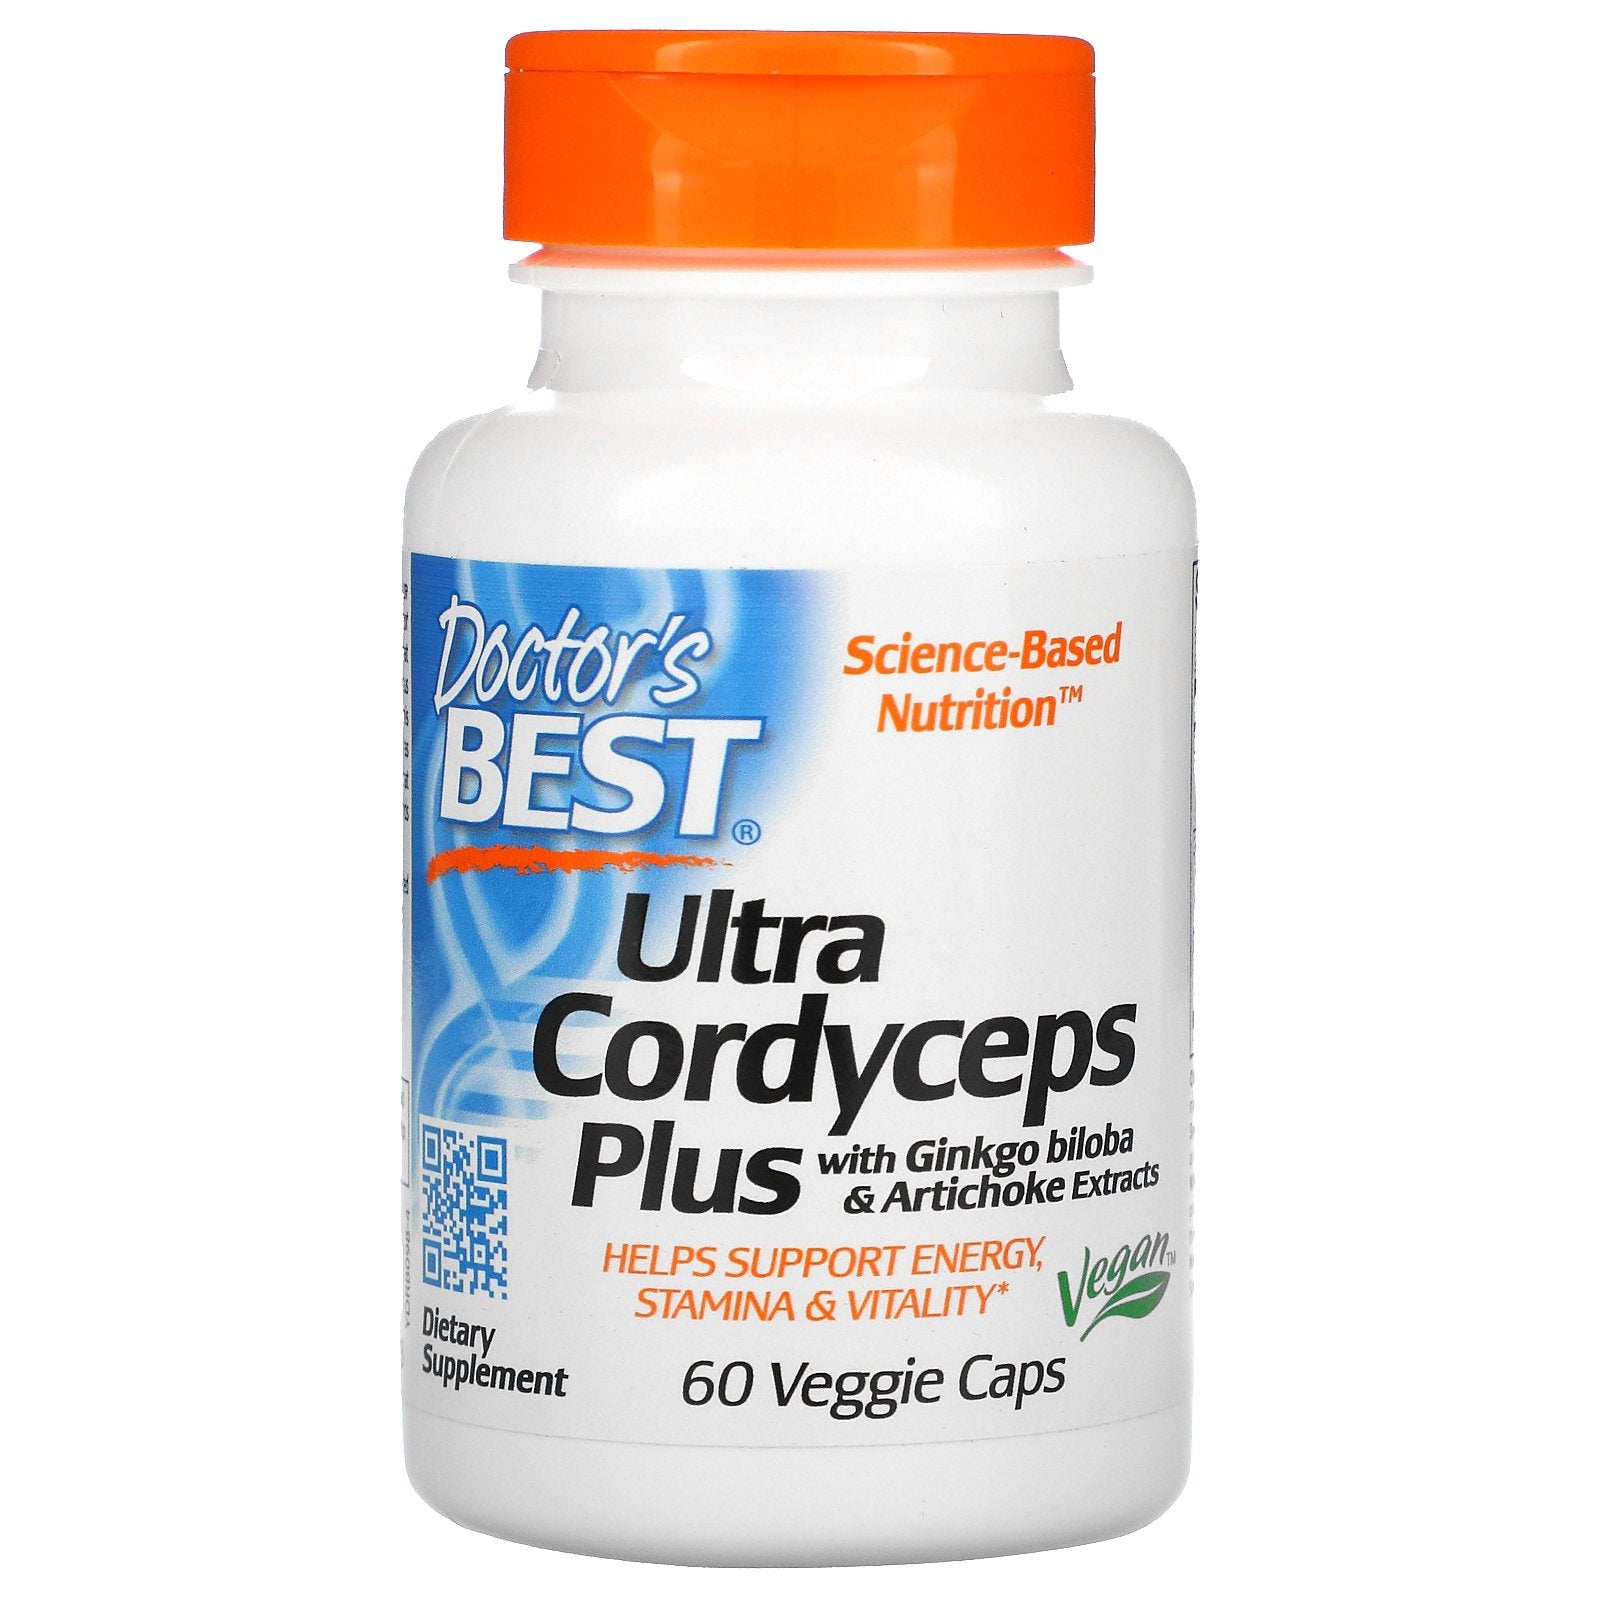 Doctor's Best, Ultra Cordyceps Plus with Ginkgo Biloba and Artichoke Extracts